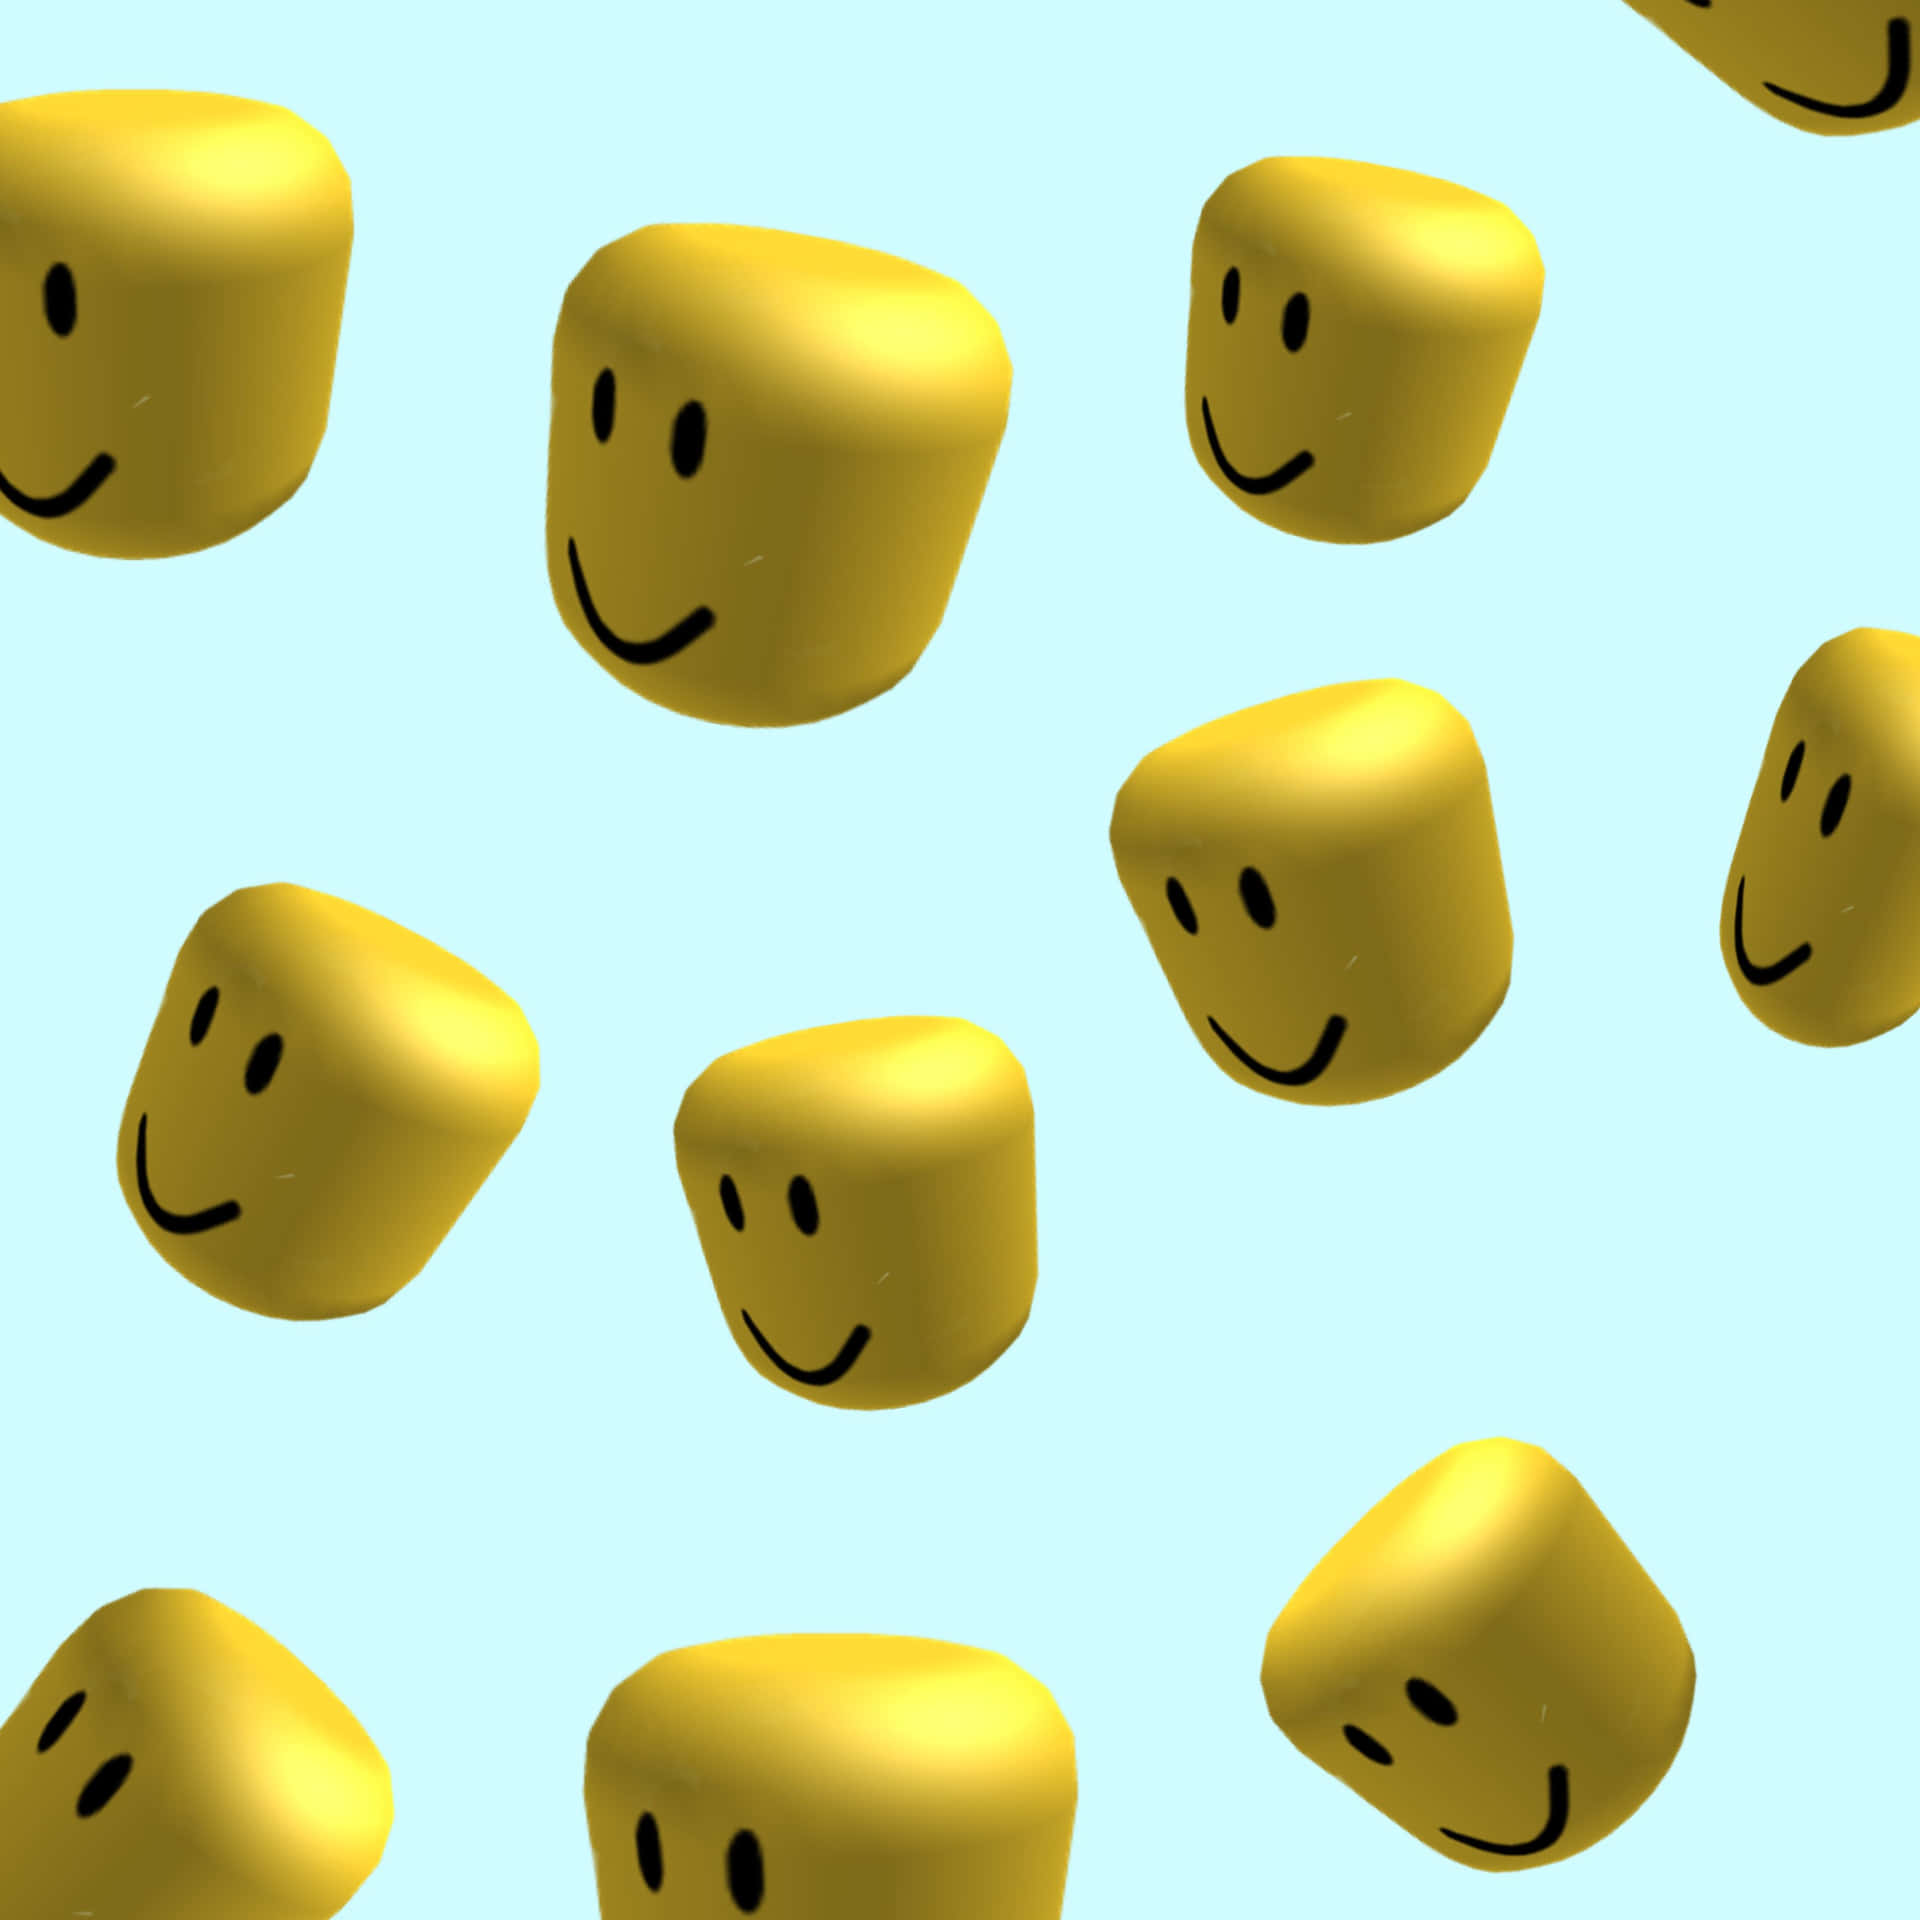 A Group Of Yellow Lego Cubes With Smiles On Them Wallpaper